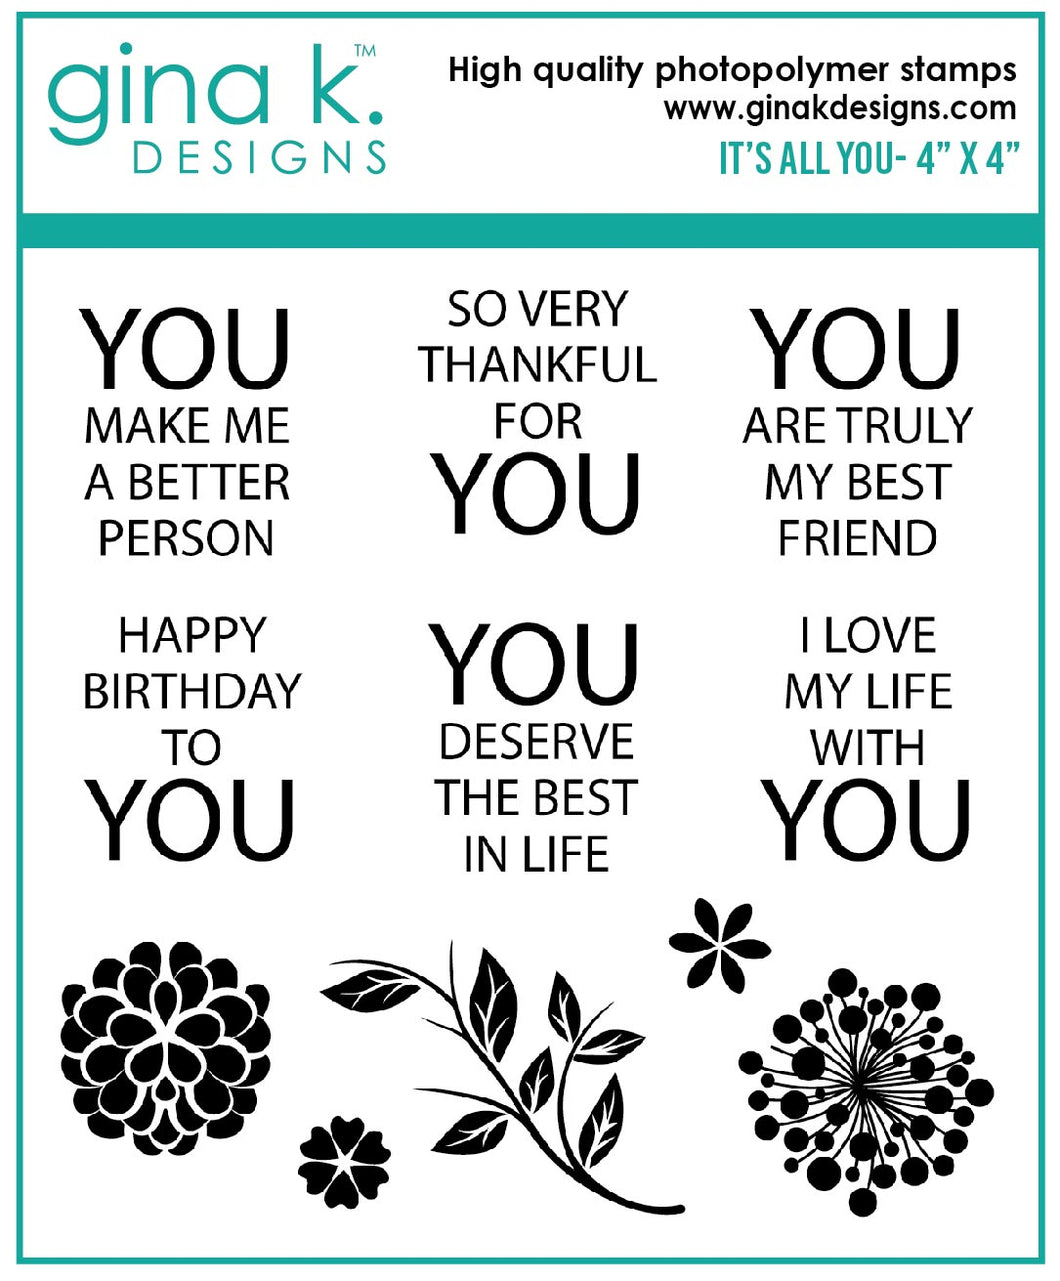 Gina K. Designs - Stamps - It's All You. These sentiments are a perfect way to express your appreciation and thankfulness to share your makes with others. This set is made of premium clear photopolymer and measures 4